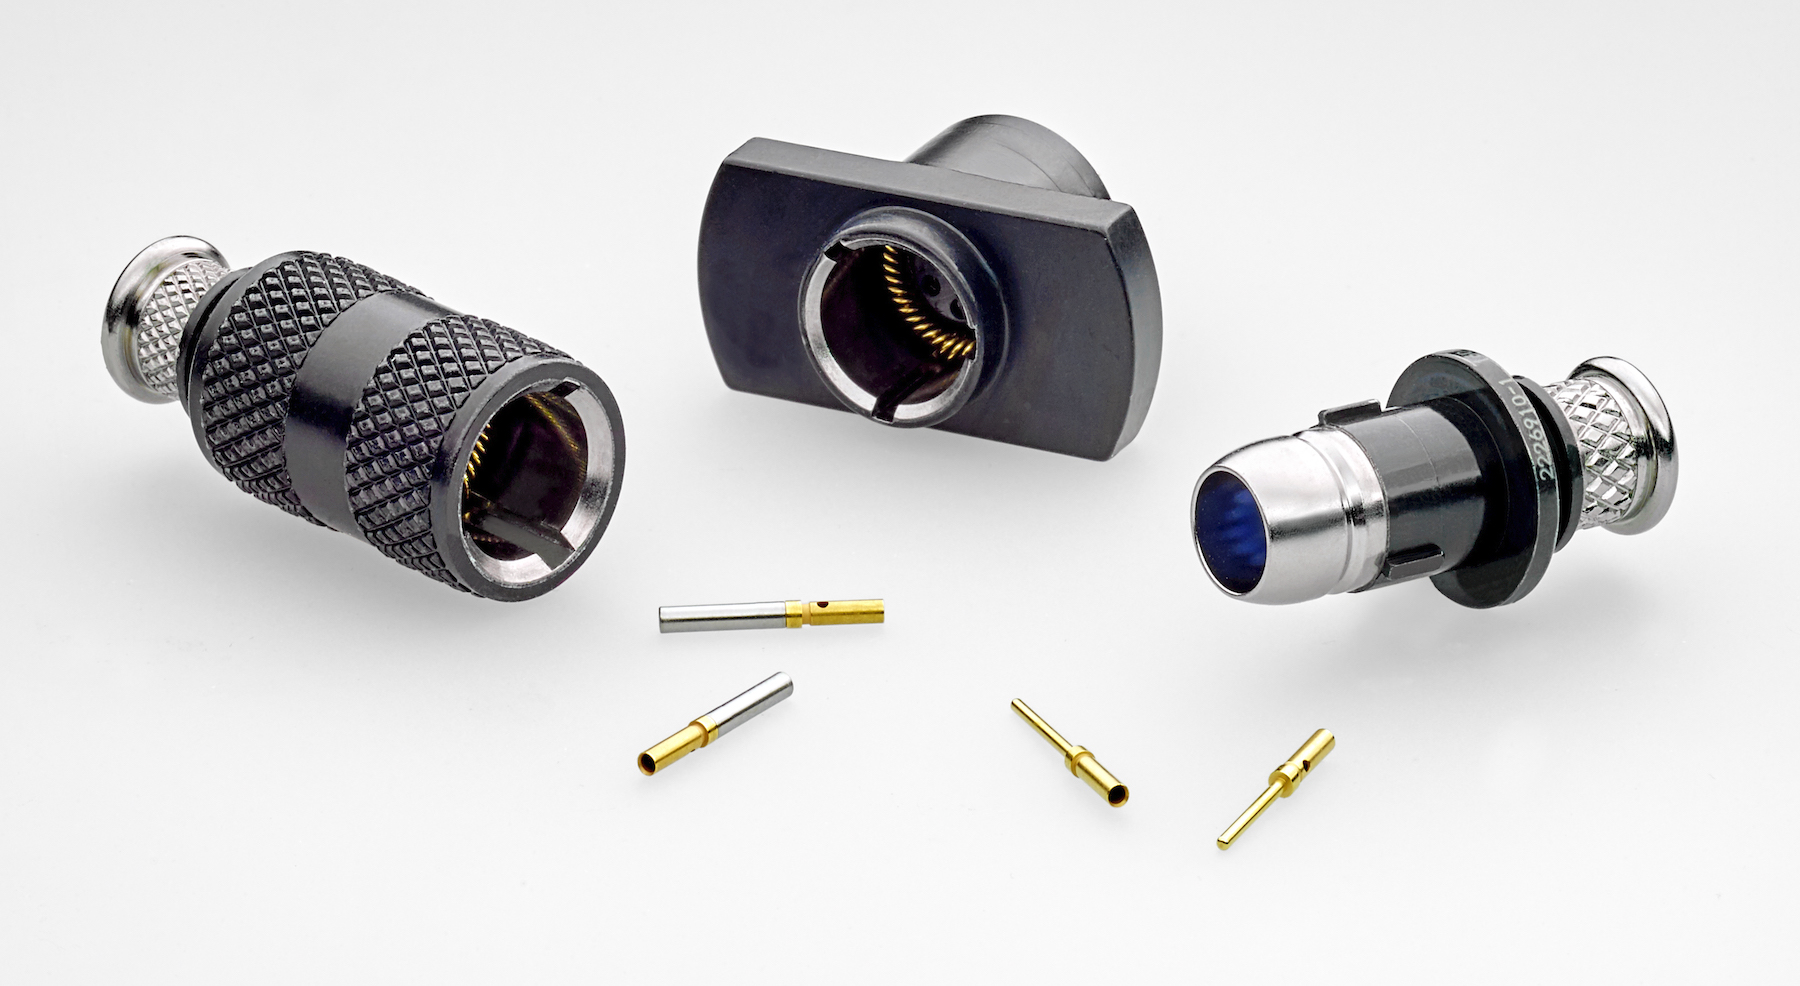  circular mil-spec connector products from TE Connectivity